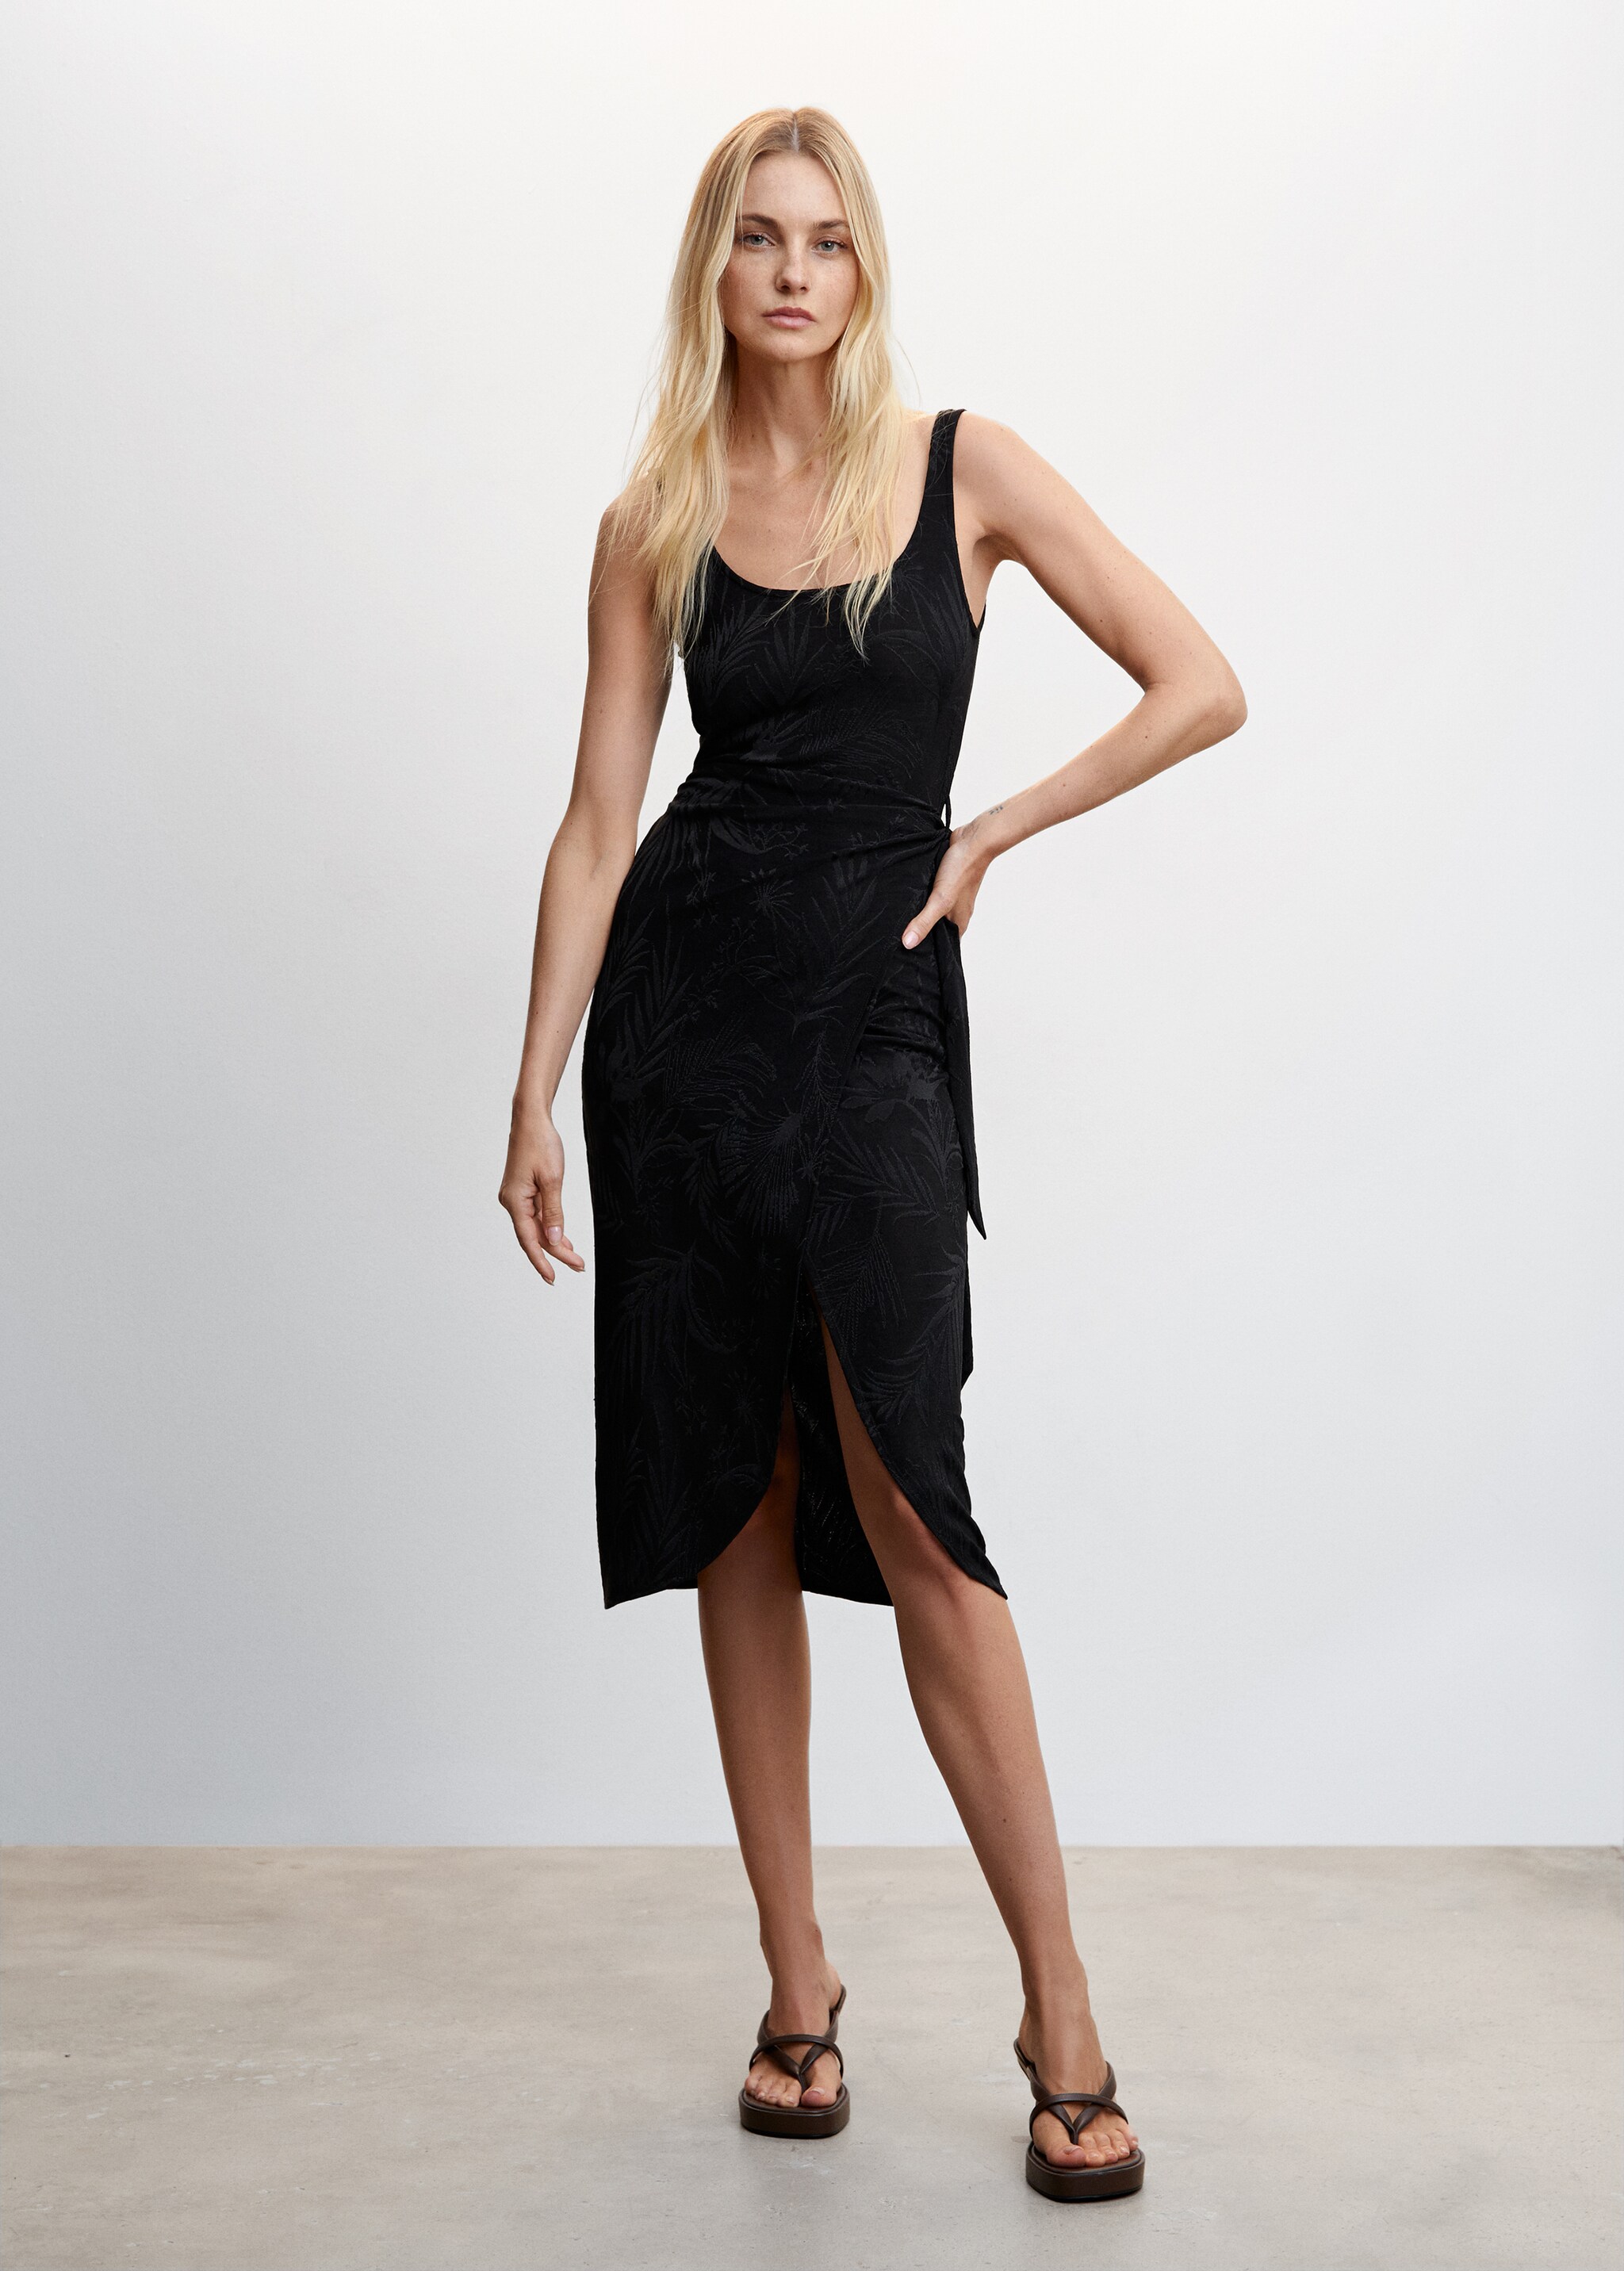 Knotted jacquard dress - General plane